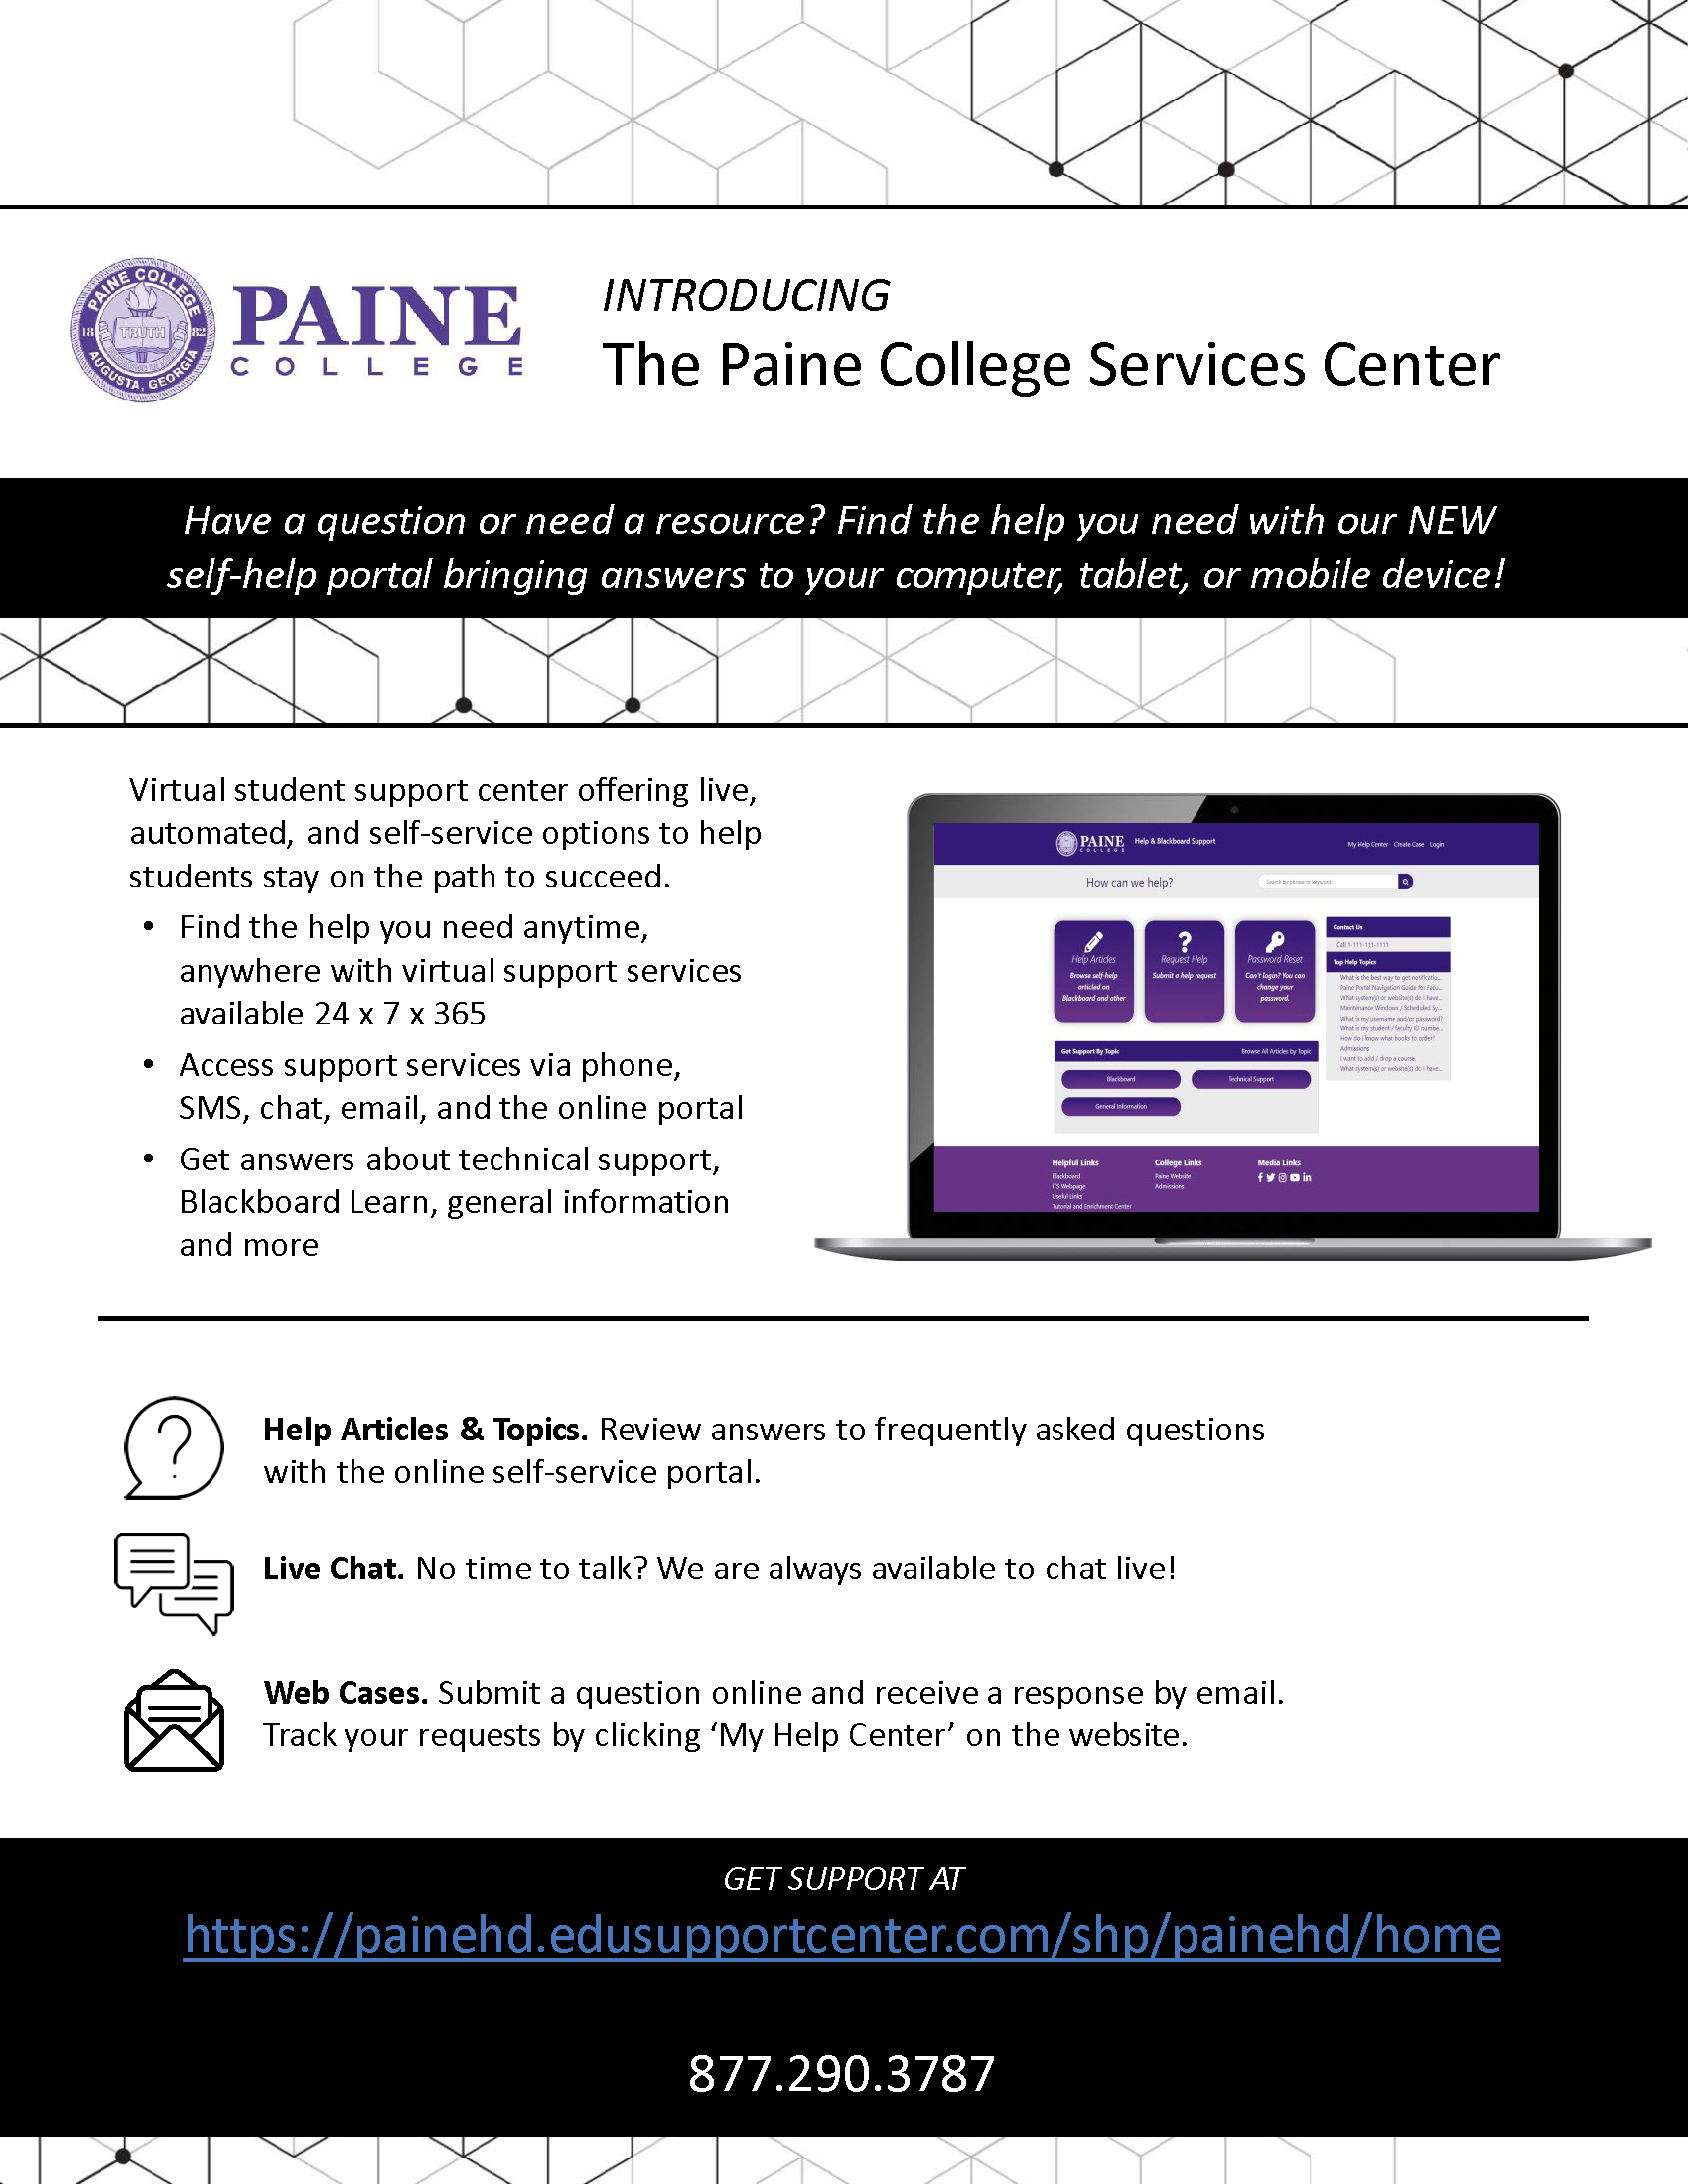 Paine College New Virtual Helpdesk Support